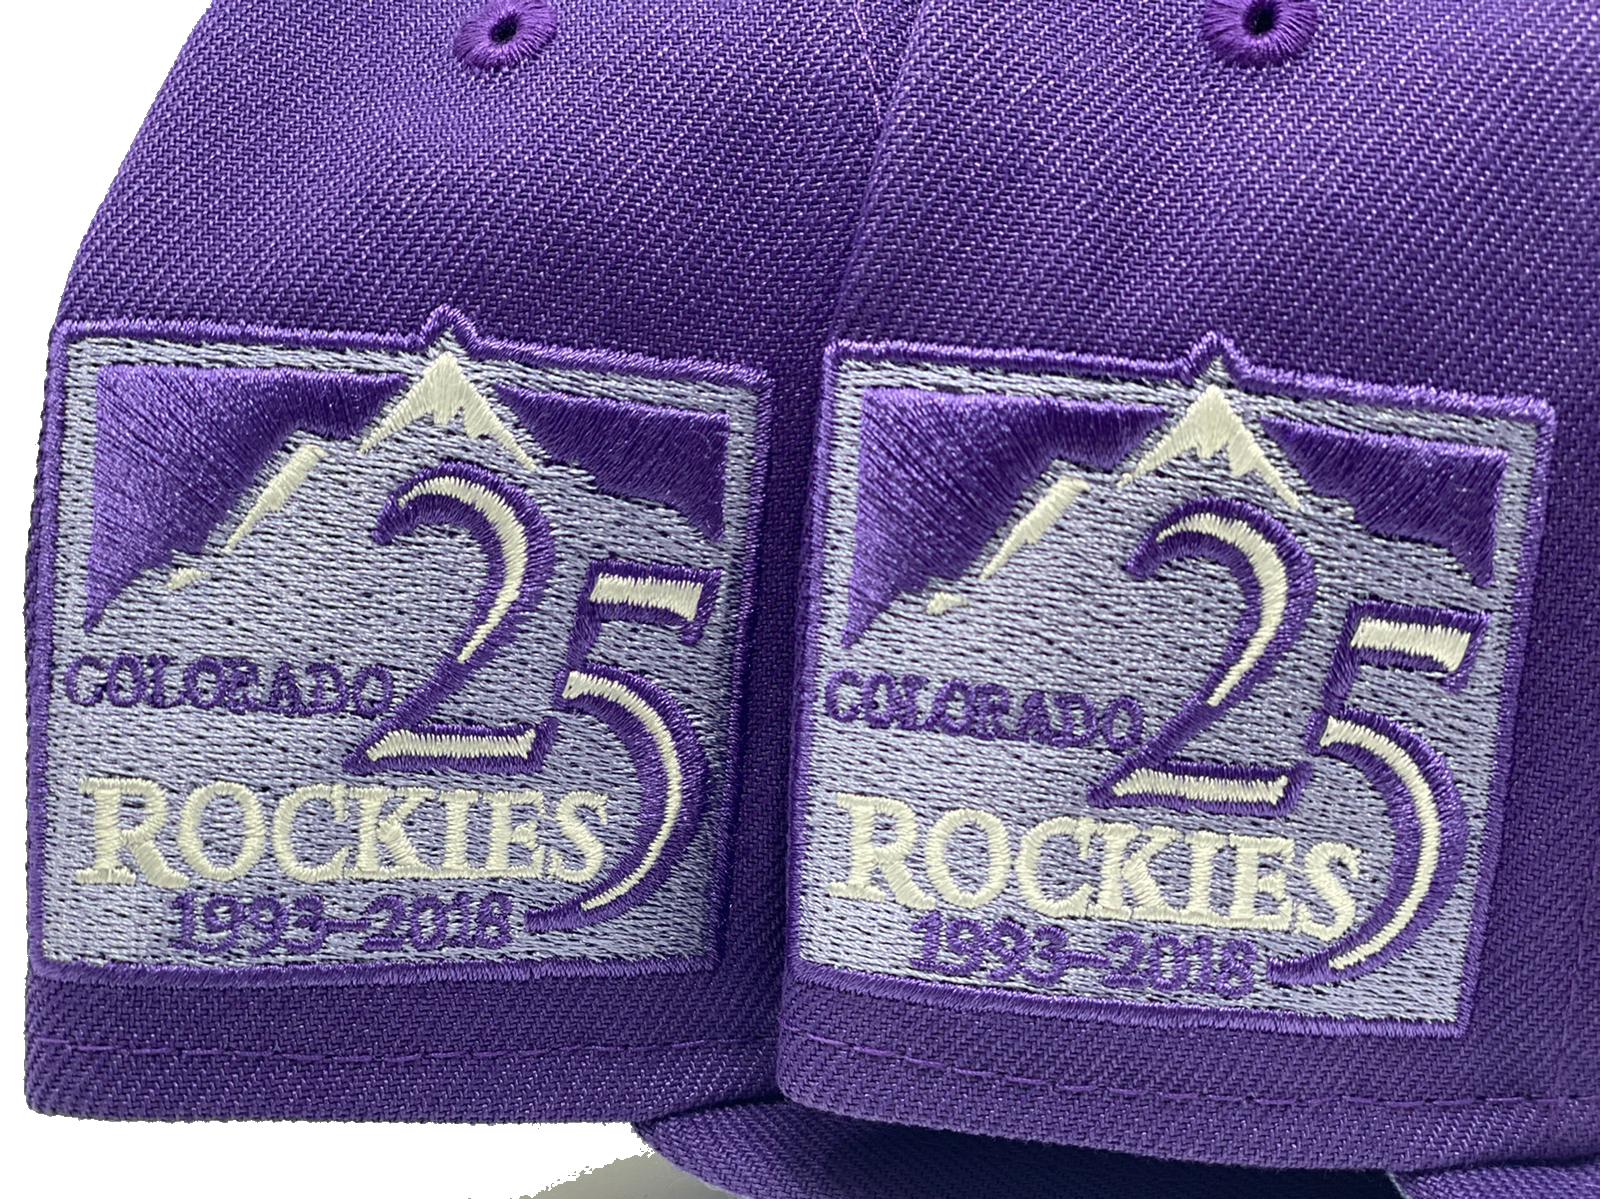 COLORADO ROCKIES 25TH ANNIVERSARY FOREST GREEN LAVENDER UV FITTED HAT 7 3/8  SR